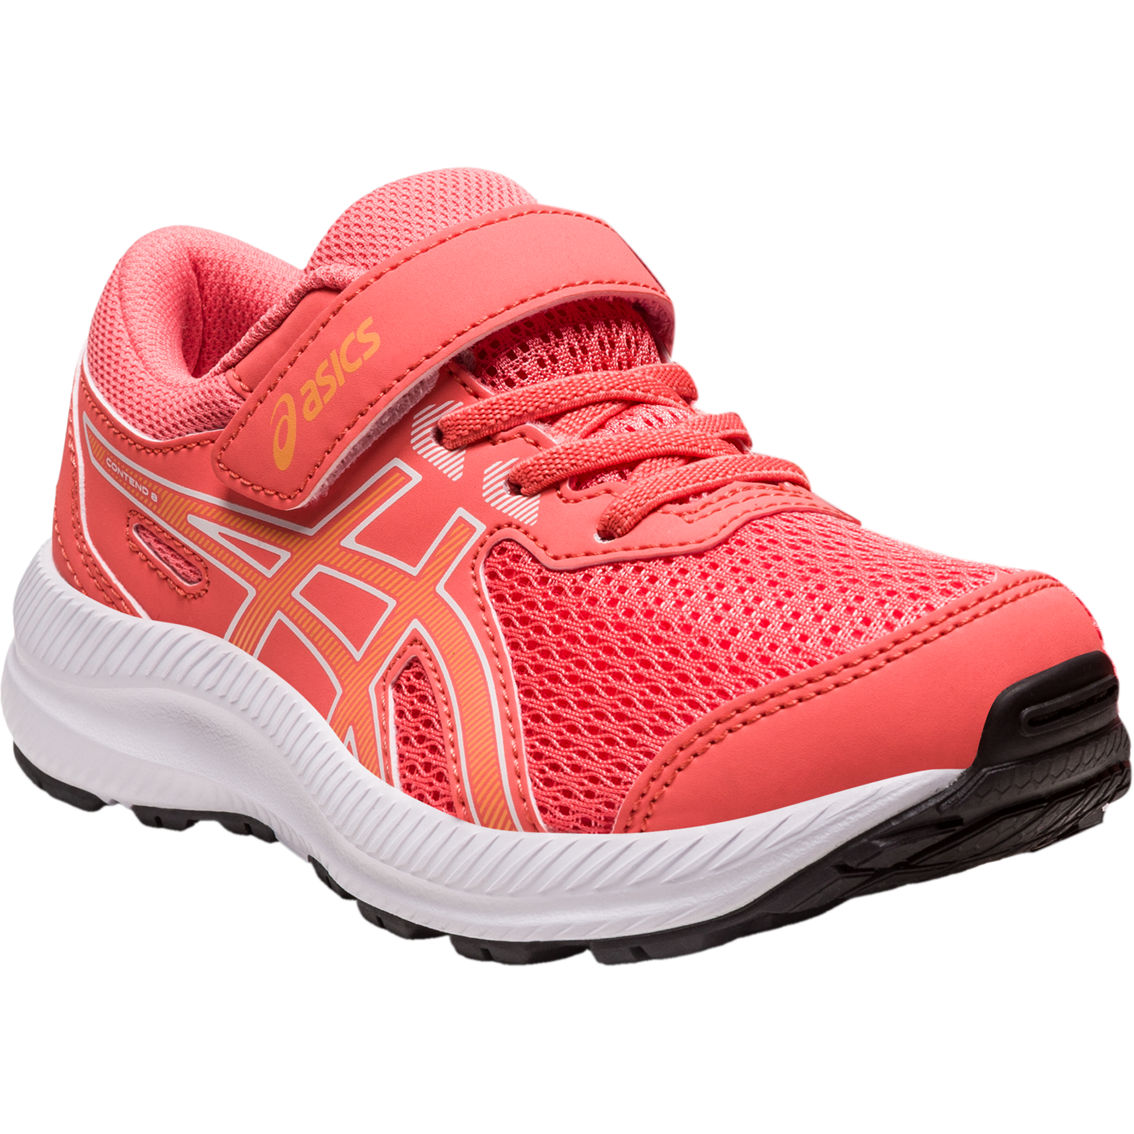 ASICS Preschool Girl's Contend 8 Shoes - Image 1 of 7